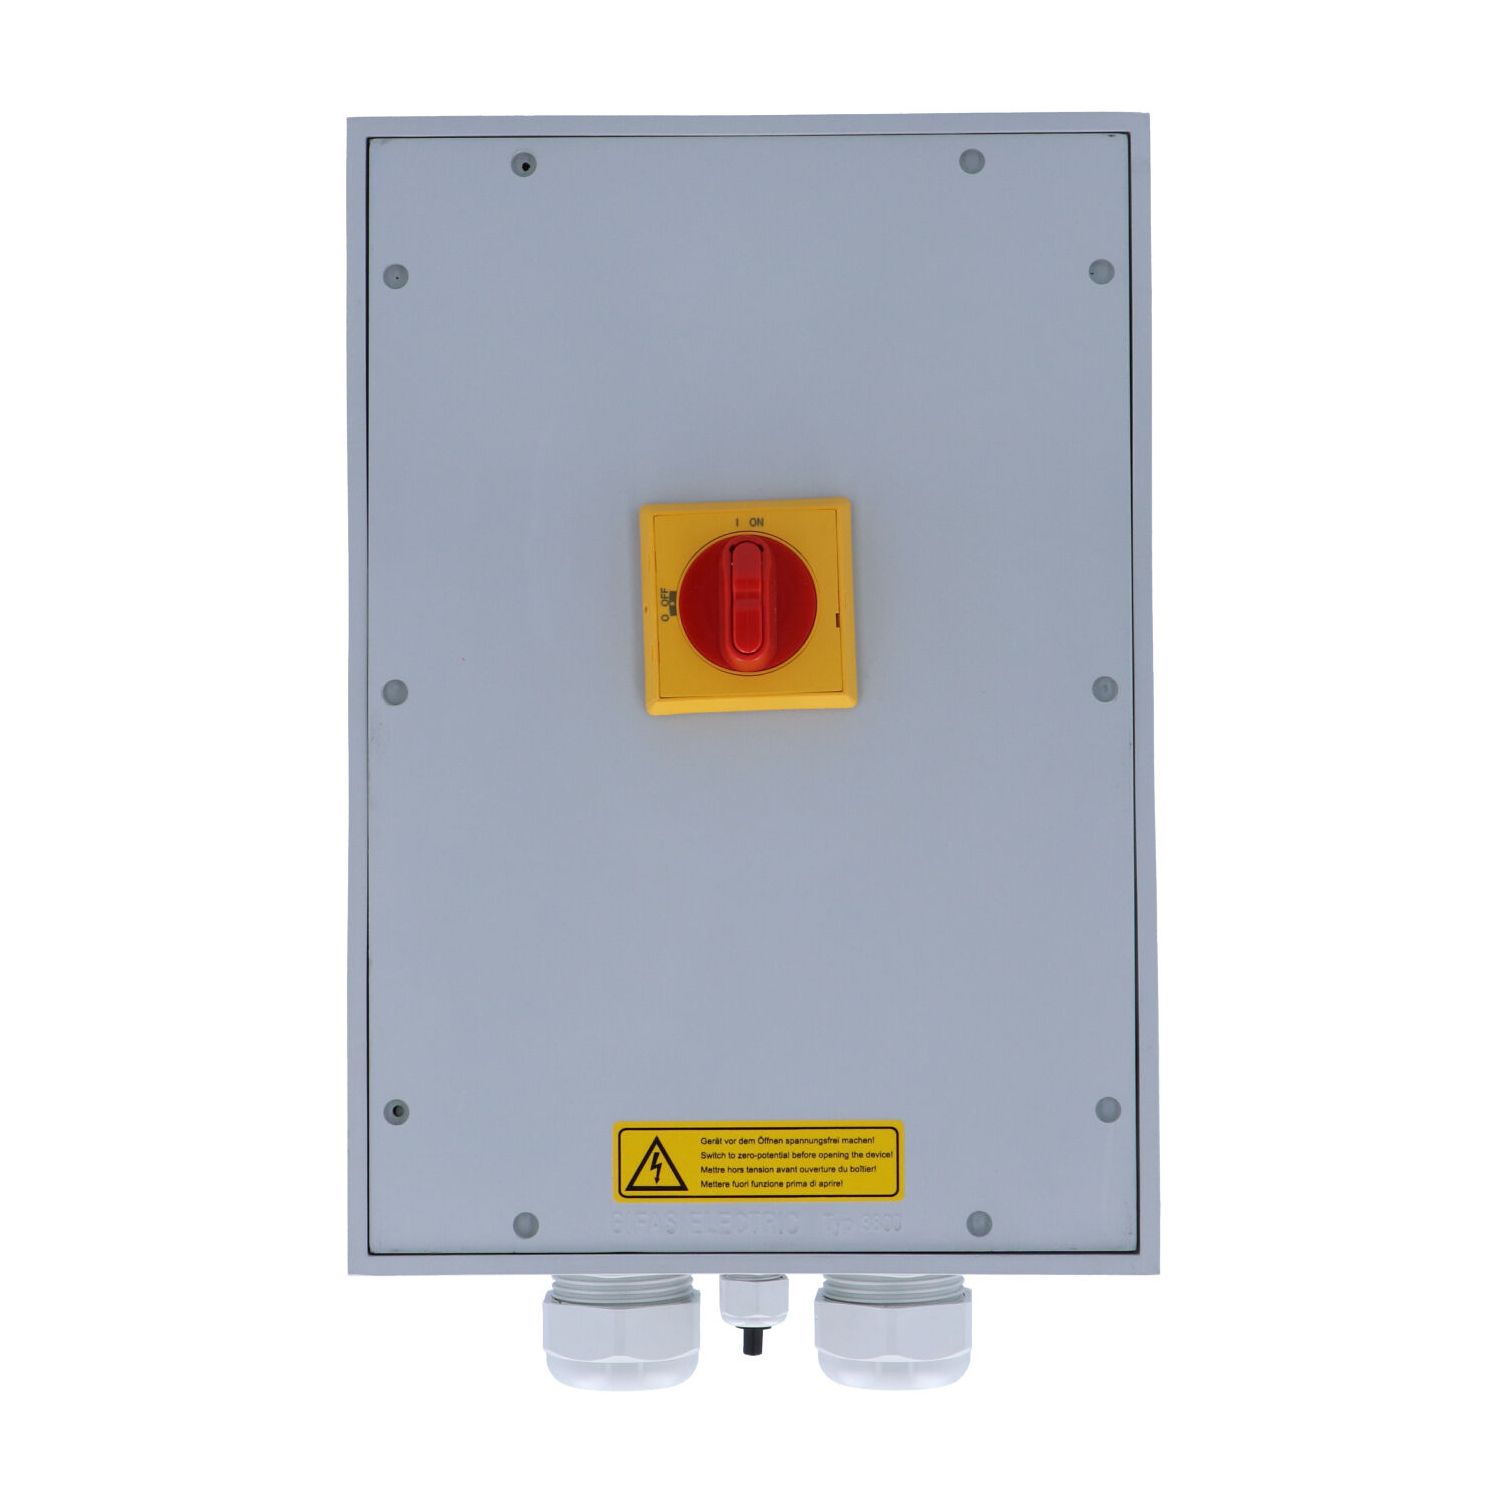 p style='margin:0;'>Main switch box with emergency shut-off function -  GIFAS-ELECTRIC GmbH